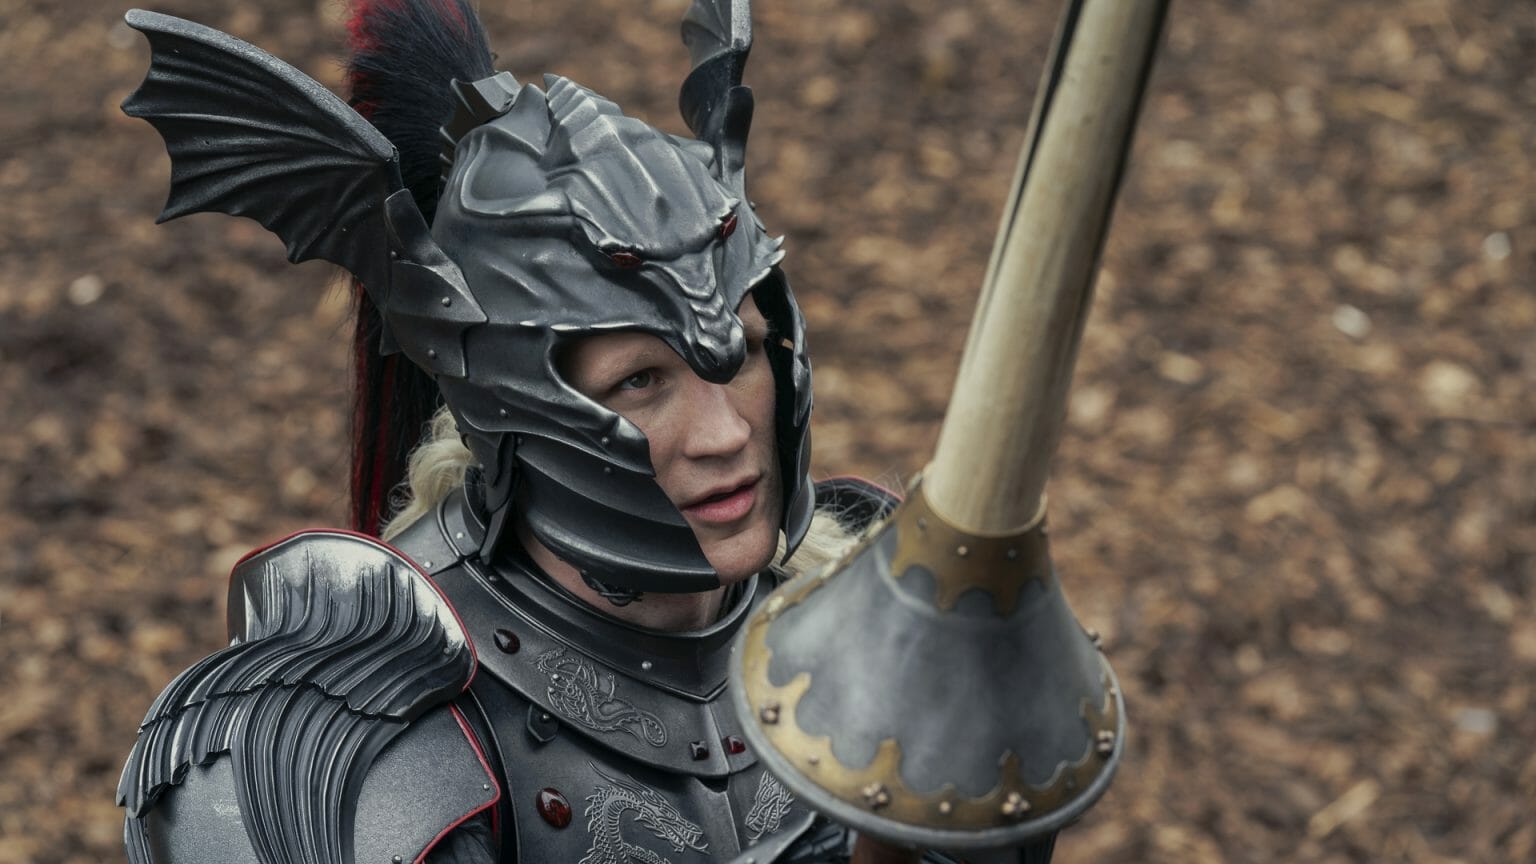 Matt Smith stars as the lucrative Prince Daemon Targaryen in his black dragon battle armor while holding a lance in HOUSE OF THE DRAGON on HBO.